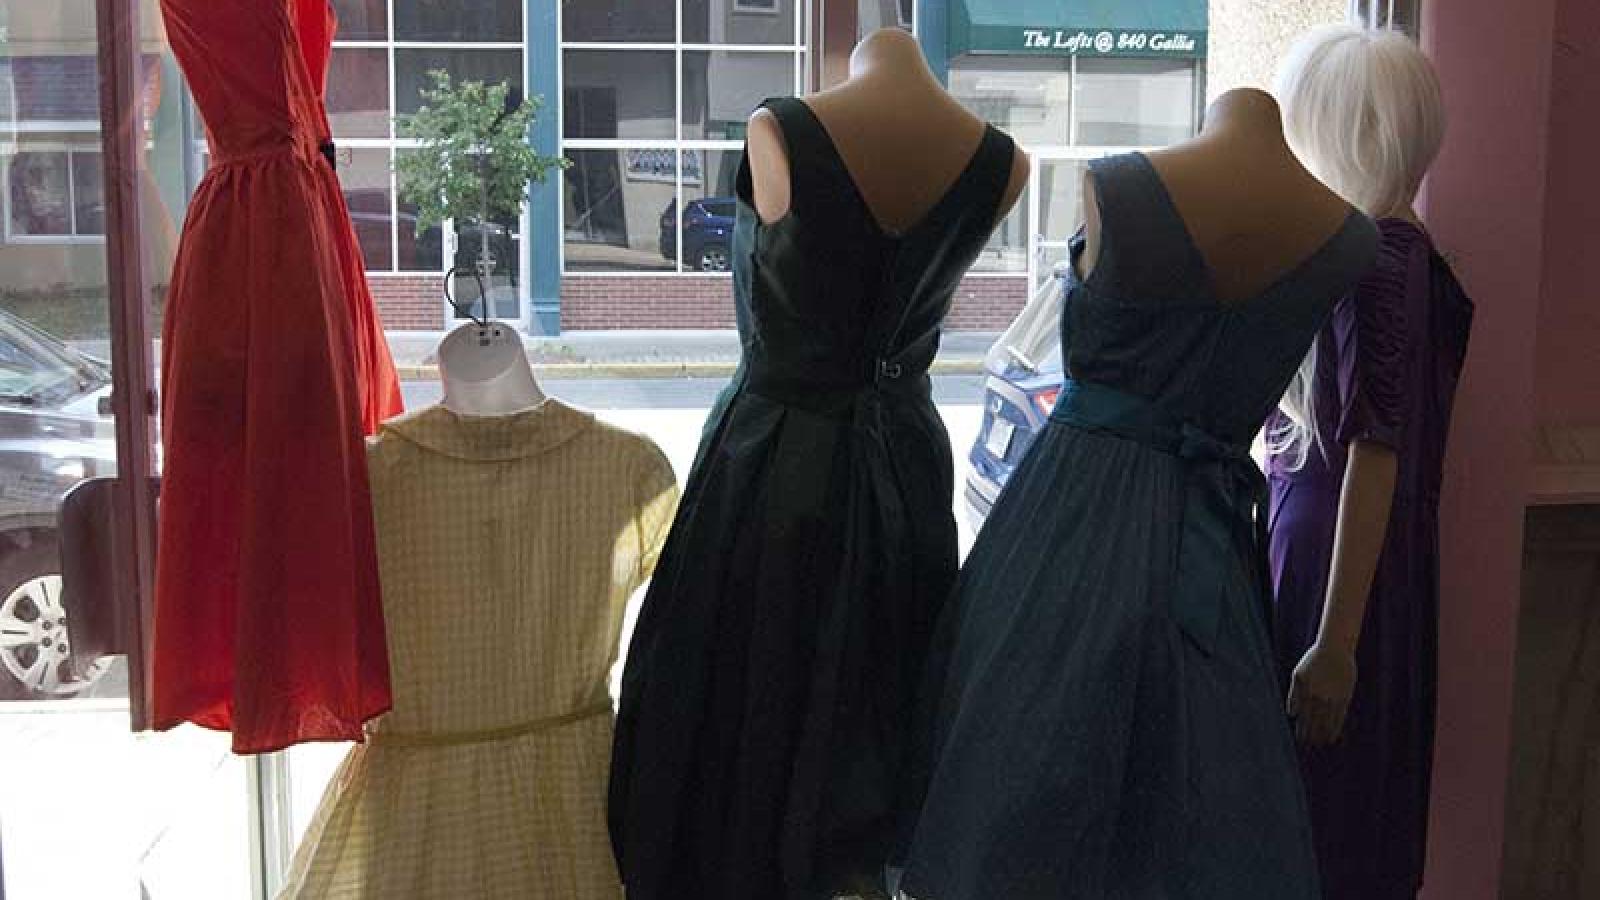 window display dresses from behind